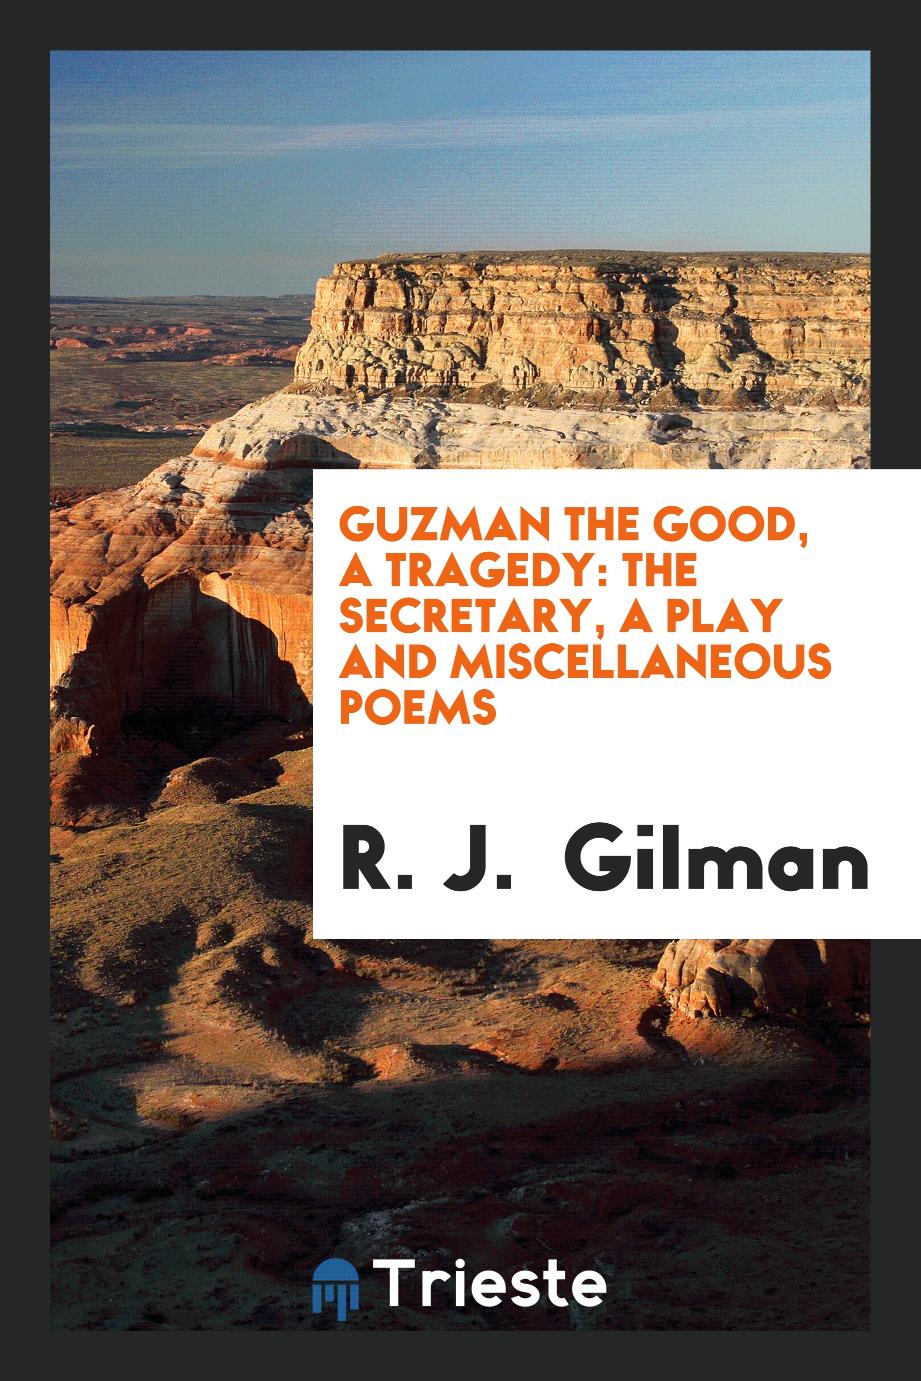 Guzman the Good, a Tragedy: The Secretary, a Play and Miscellaneous Poems